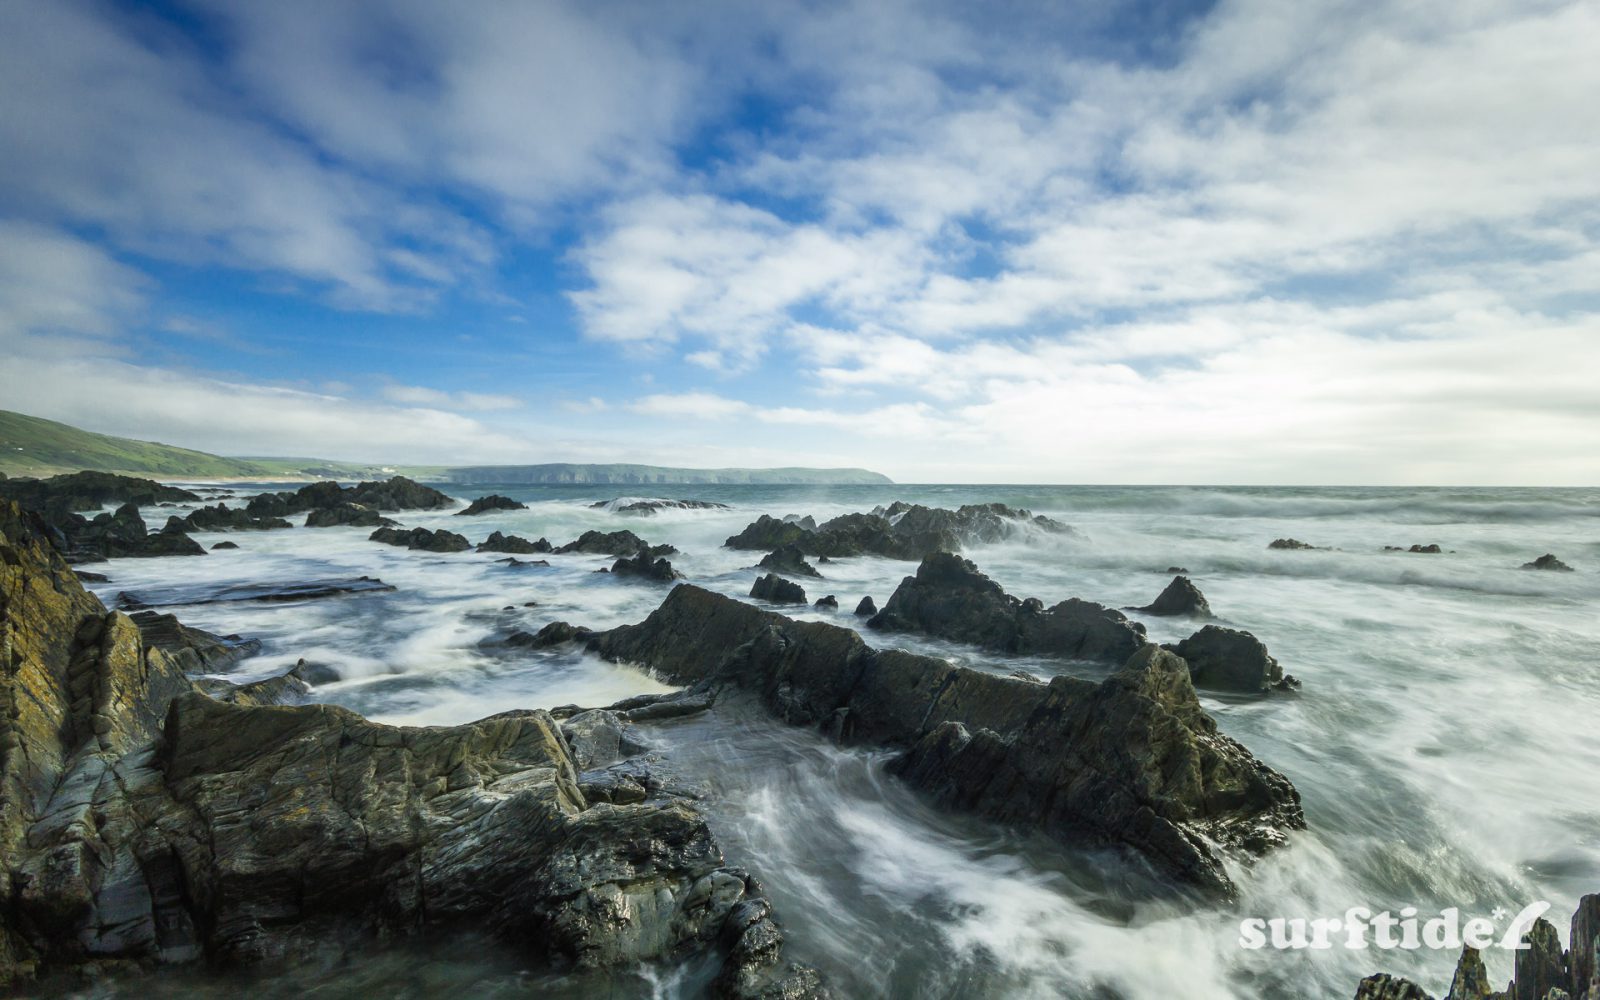 Long exposure photo of the waves breaking on the rocks next to Barricane Beach in North Devon, England